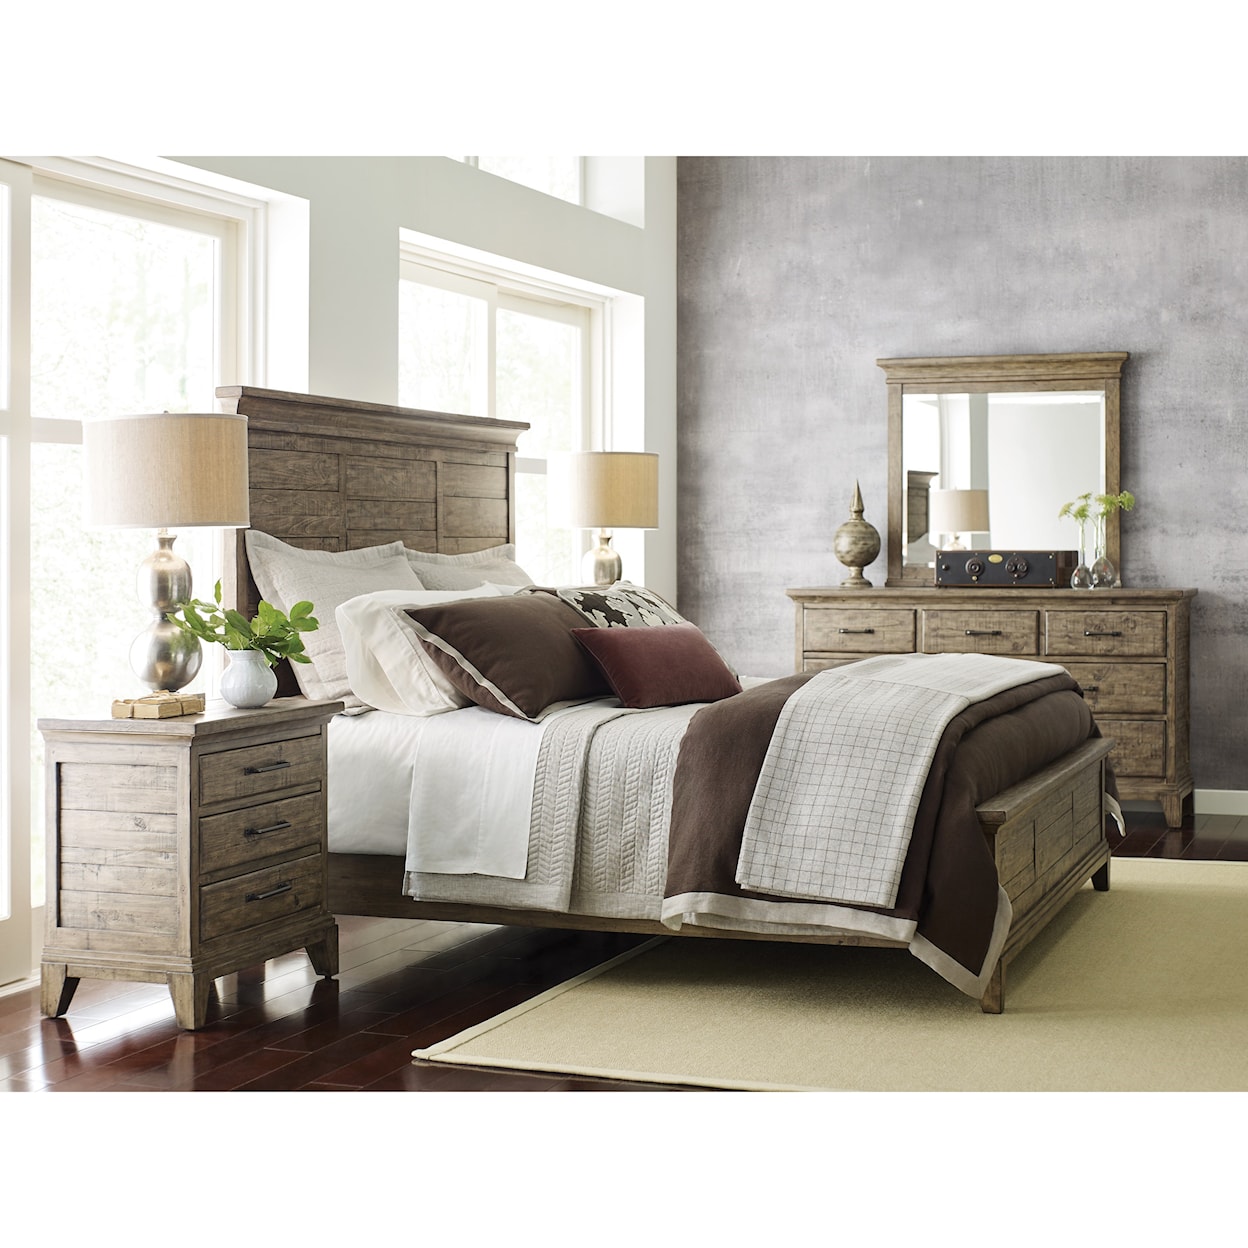 Kincaid Furniture Plank Road Jessup Panel Queen Bed       